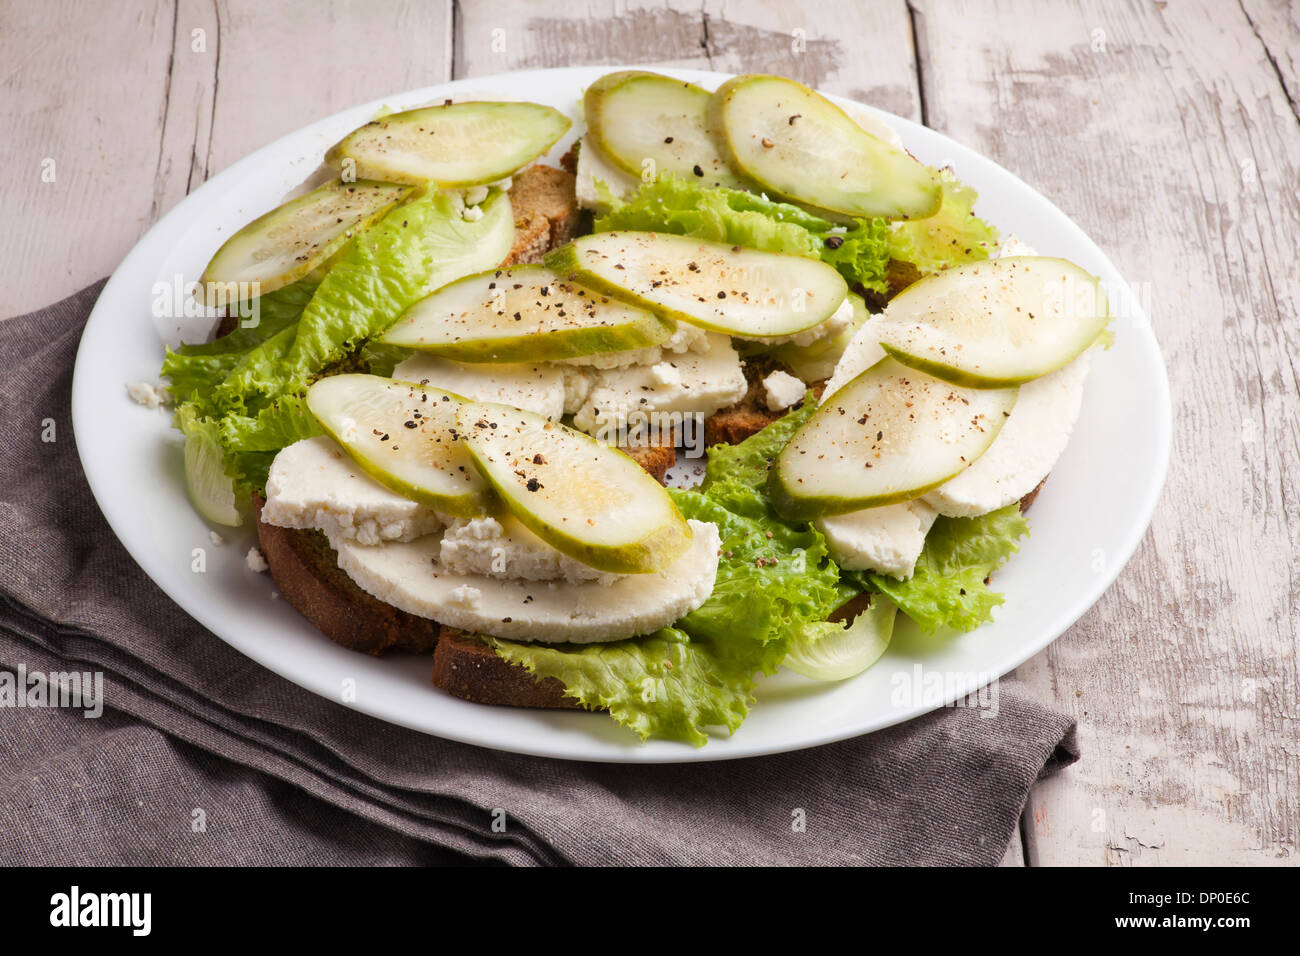 Sandwich with cottage cheese and pickled cucumber Stock Photo